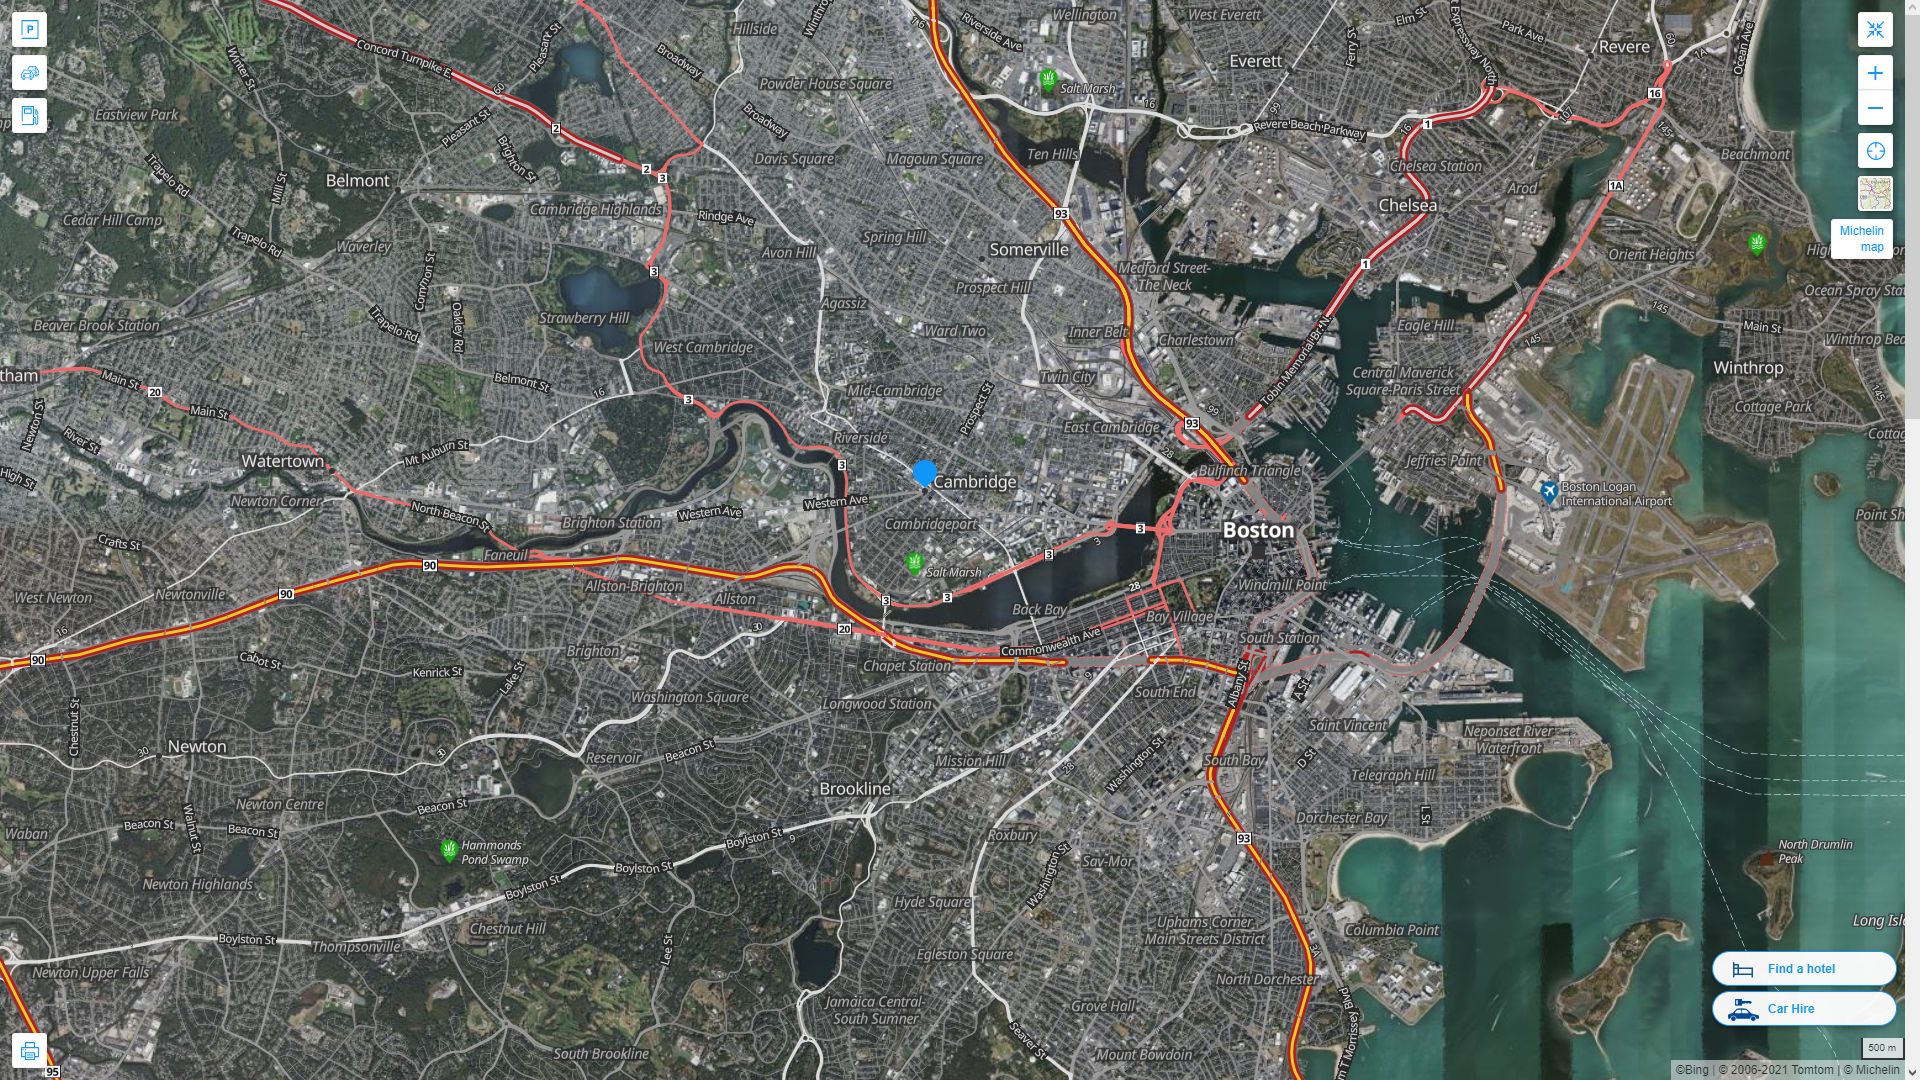 Cambridge Massachusetts Highway and Road Map with Satellite View